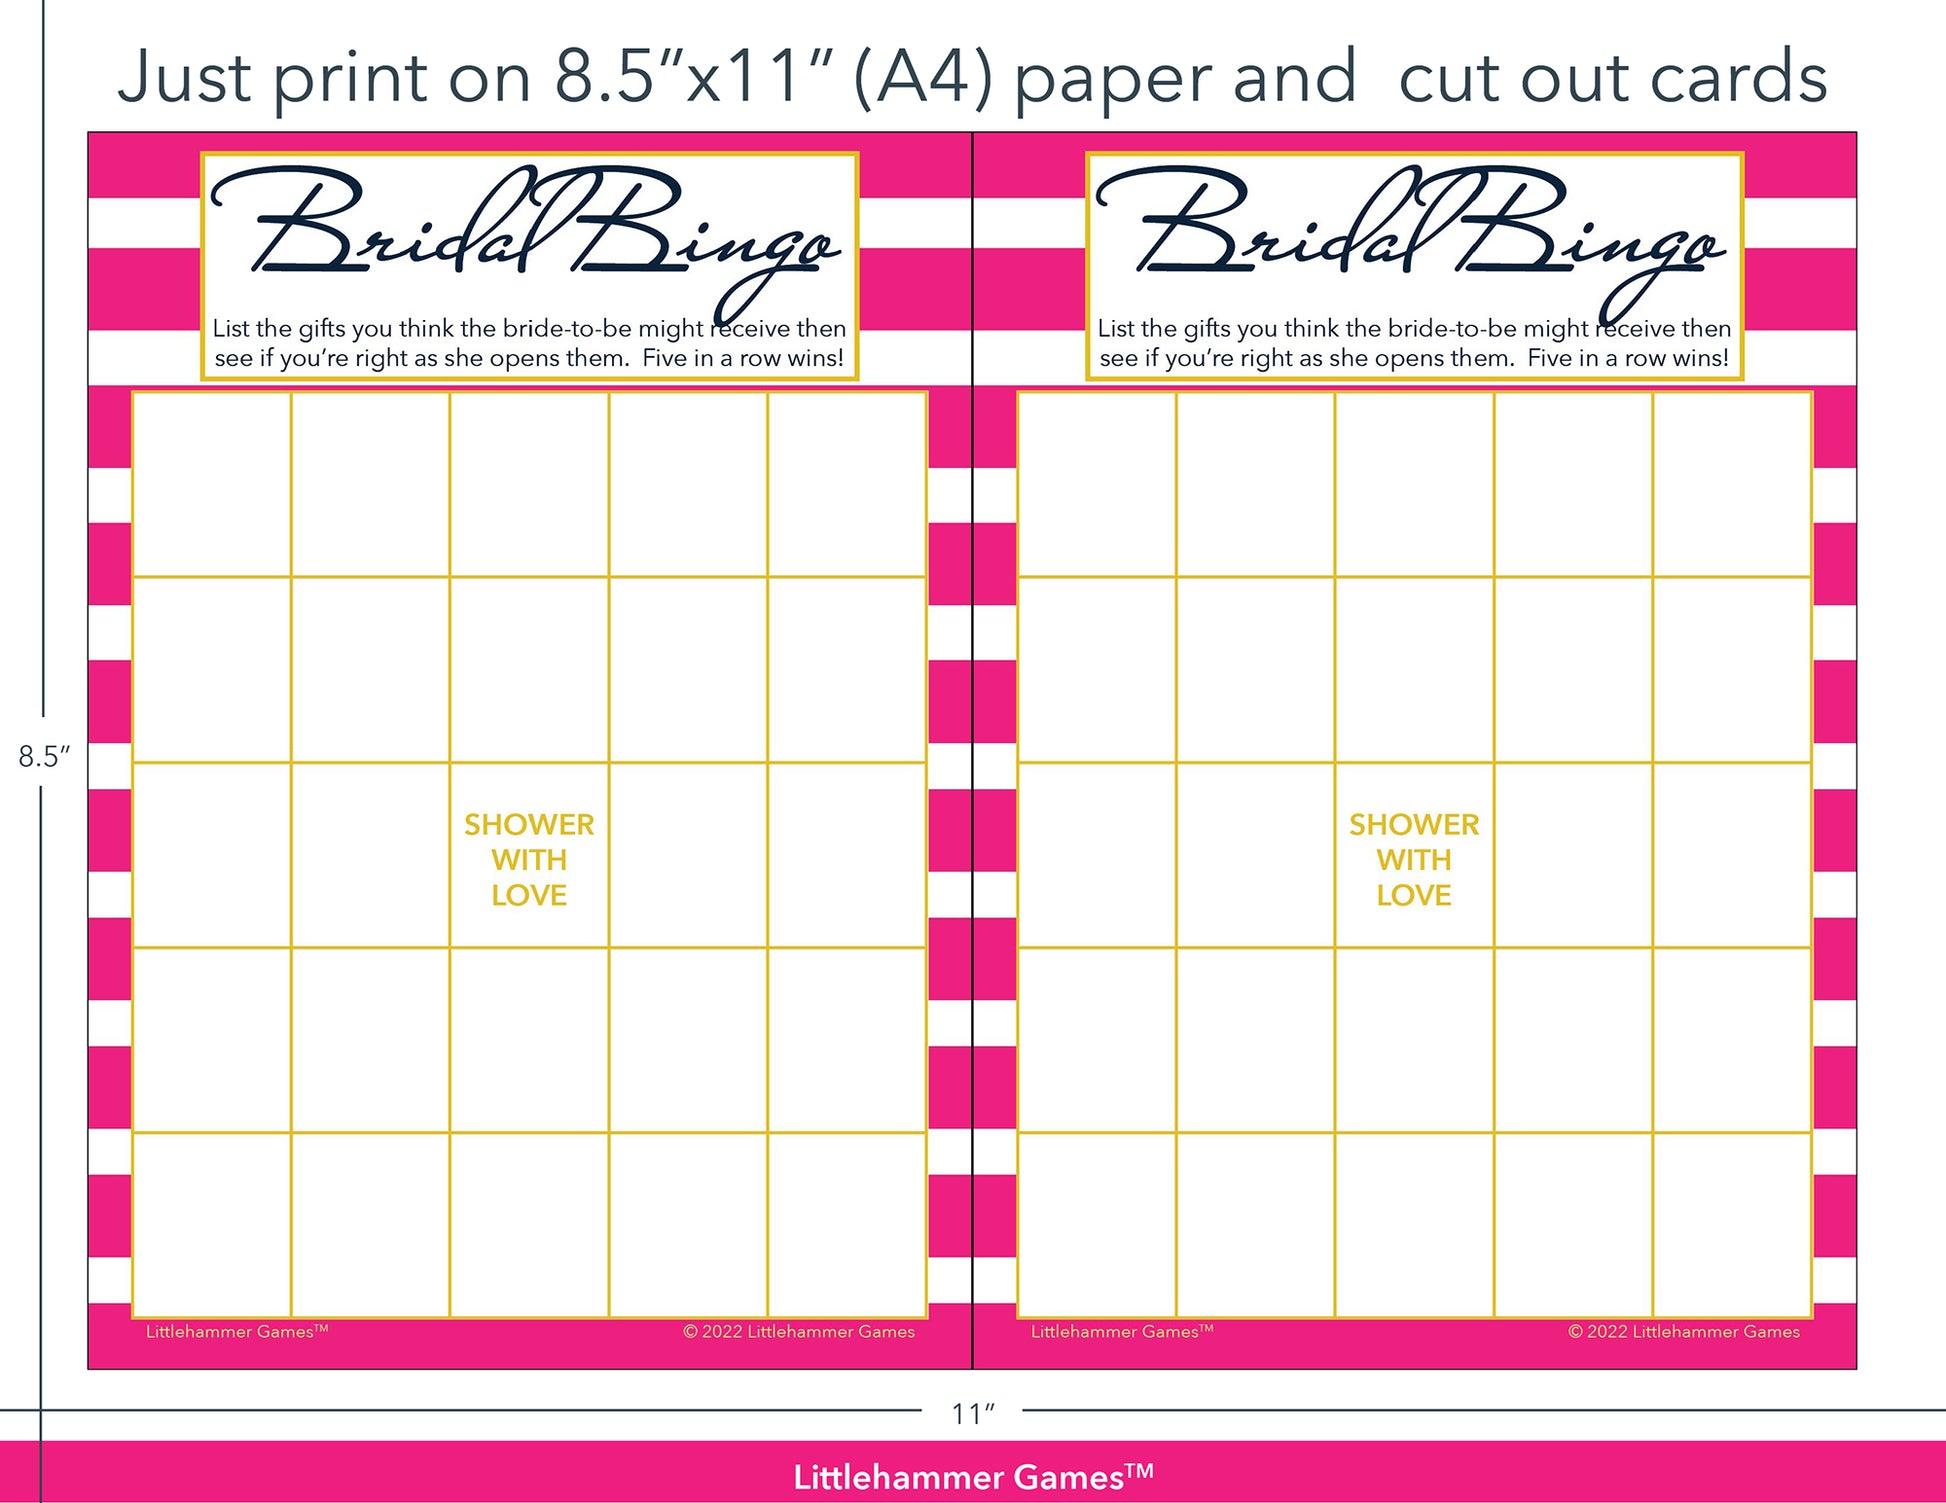 Pink-striped Bridal Gift Bingo game cards with printing instructions